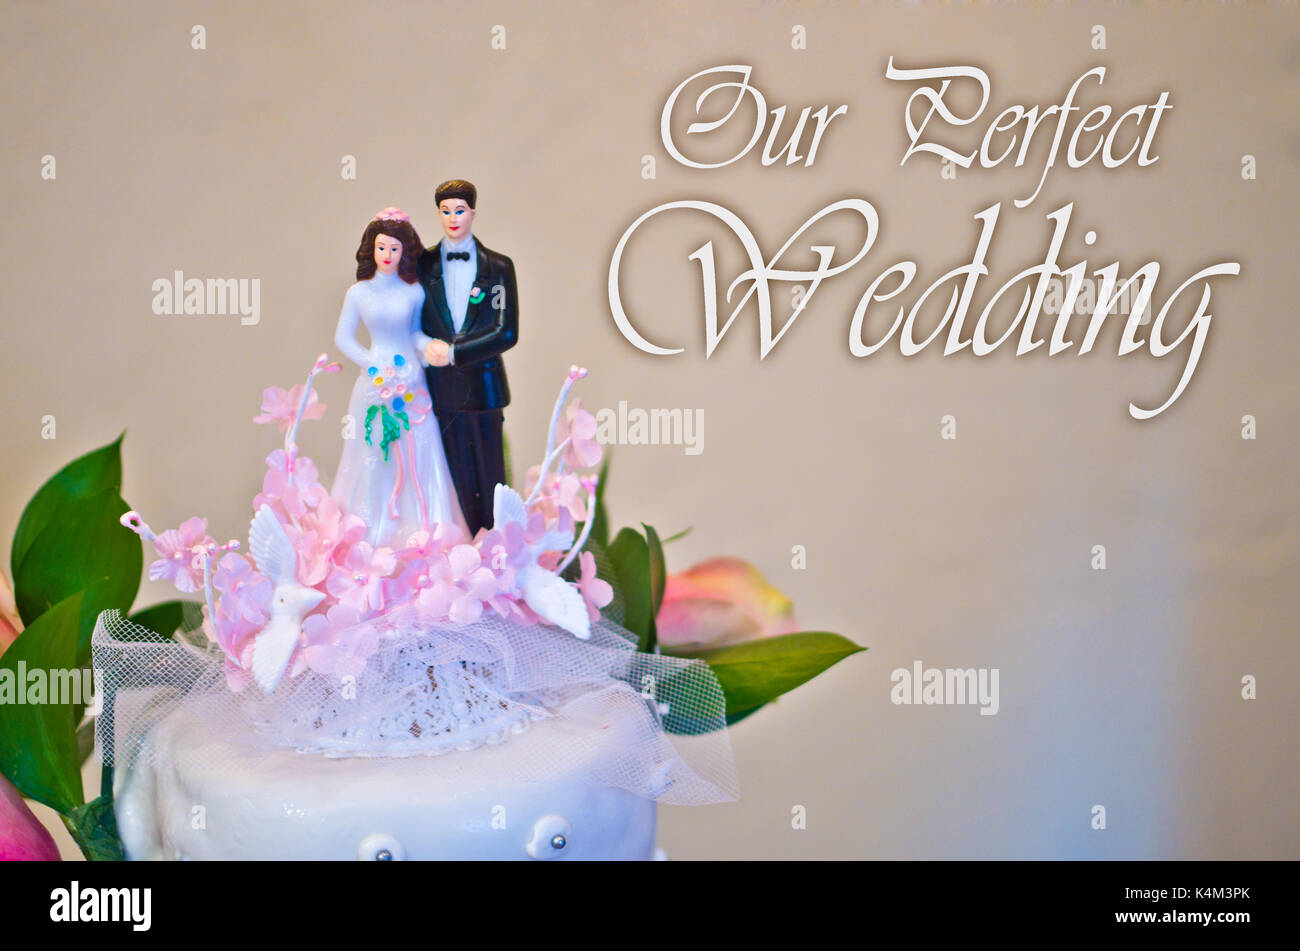 figurines of the bride and groom wedding cake wish all happiness to the newlyweds: the perfect wedding Stock Photo